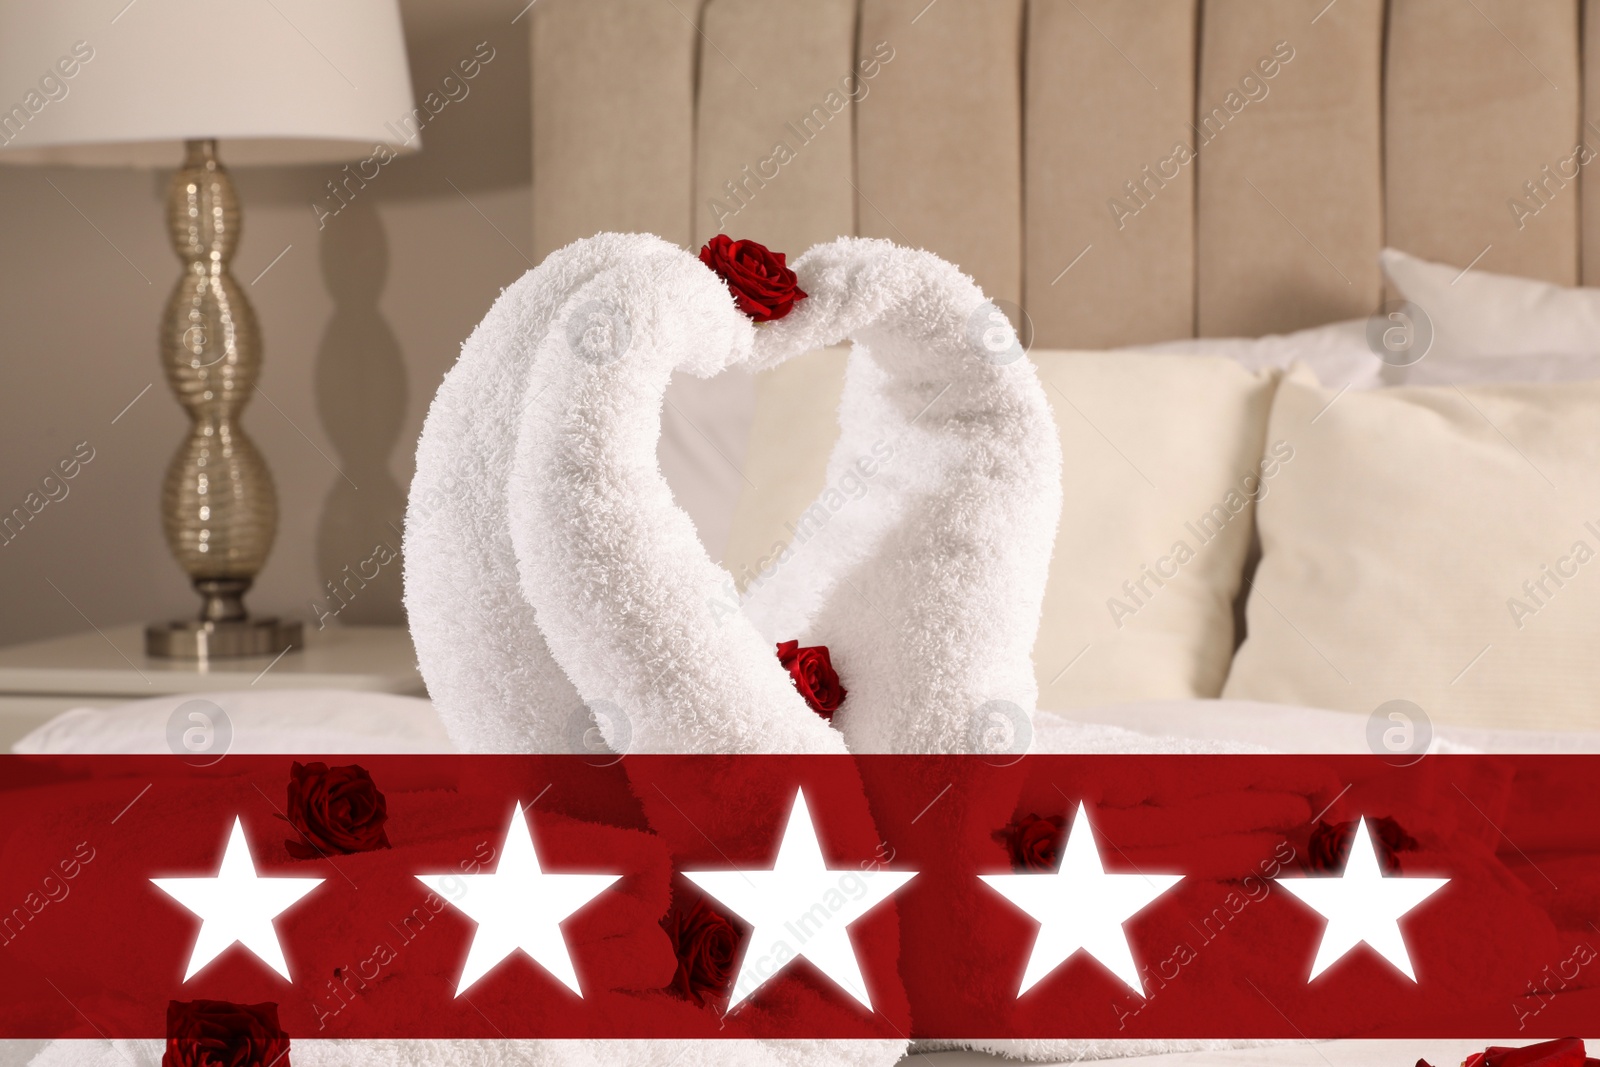 Image of Five Star Luxury Hotel. Beautiful swans made of towels decorated with red roses on bed in five star hotel room